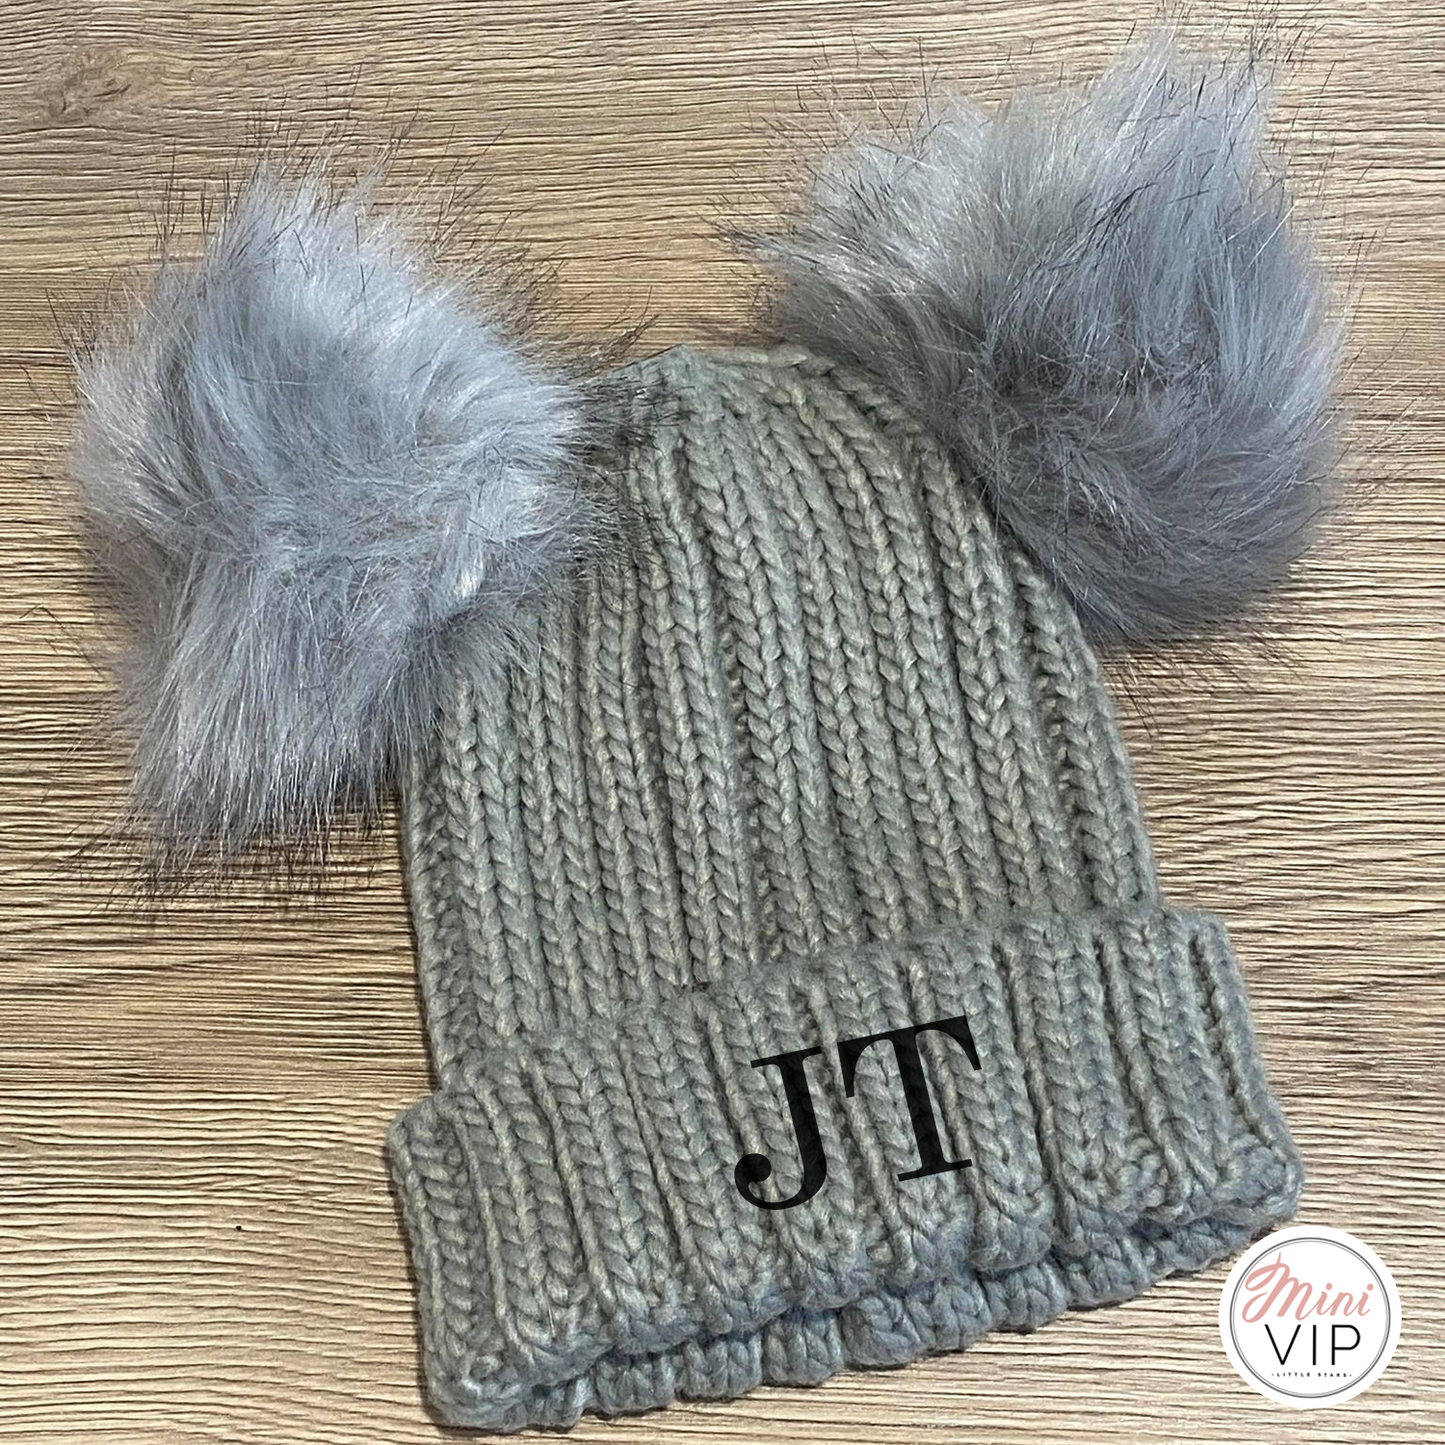 Personalised Double Grey Pom Pom Embroidered Beanie Hat - Infants, Junior & Adult sizes